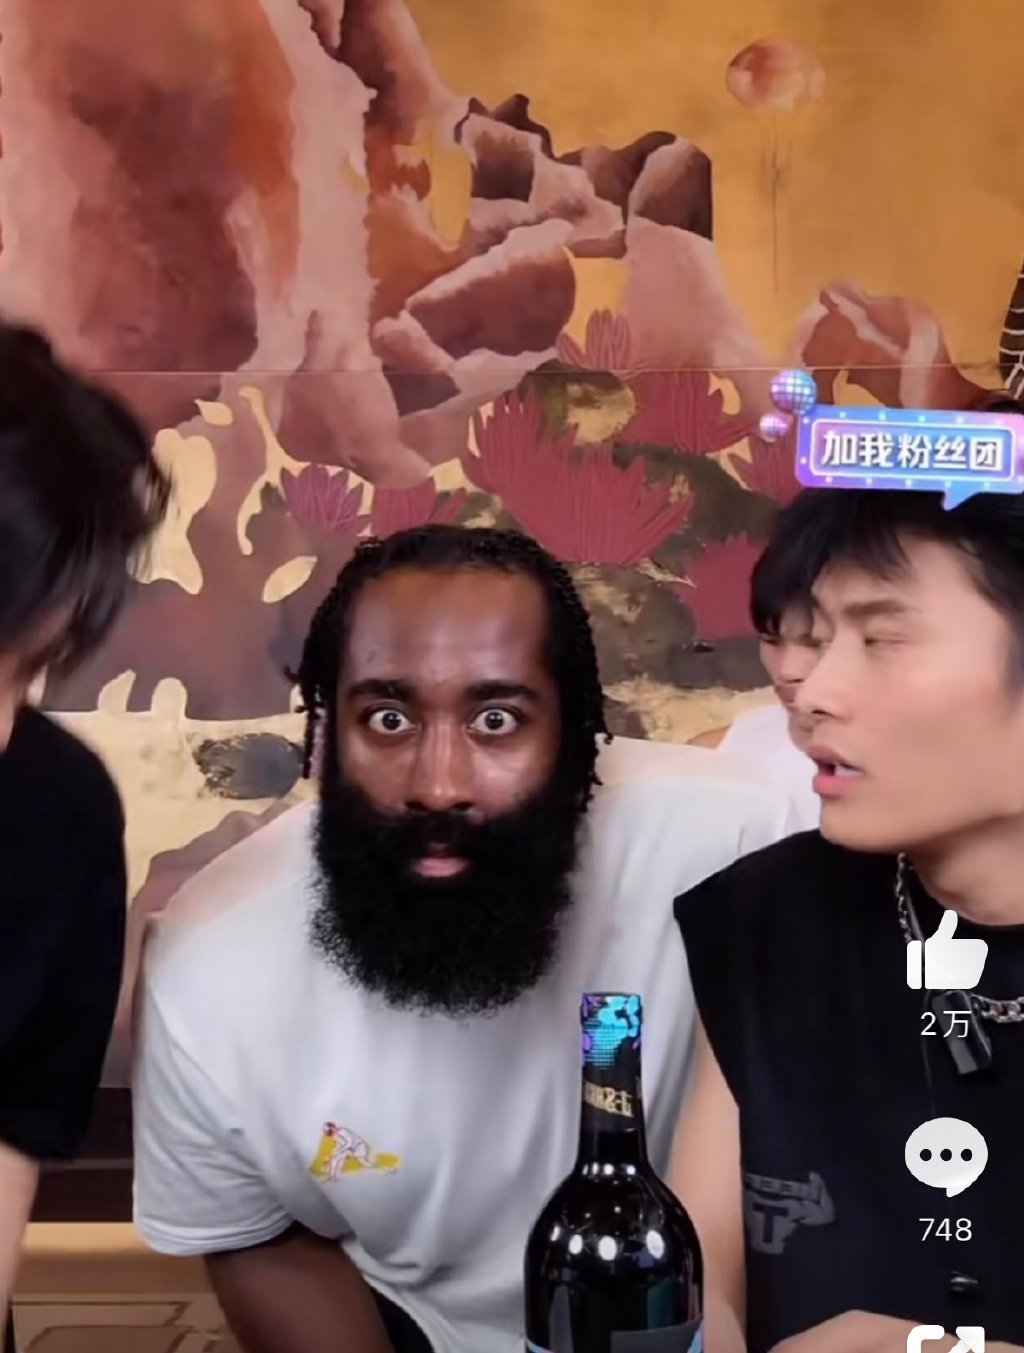 James Harden was left in disbelief after an appearance on a Chinese influencer’s live stream brought 10,000 sales of his personal brand of wine in seconds. Photo: Weibo/Xiao Yang